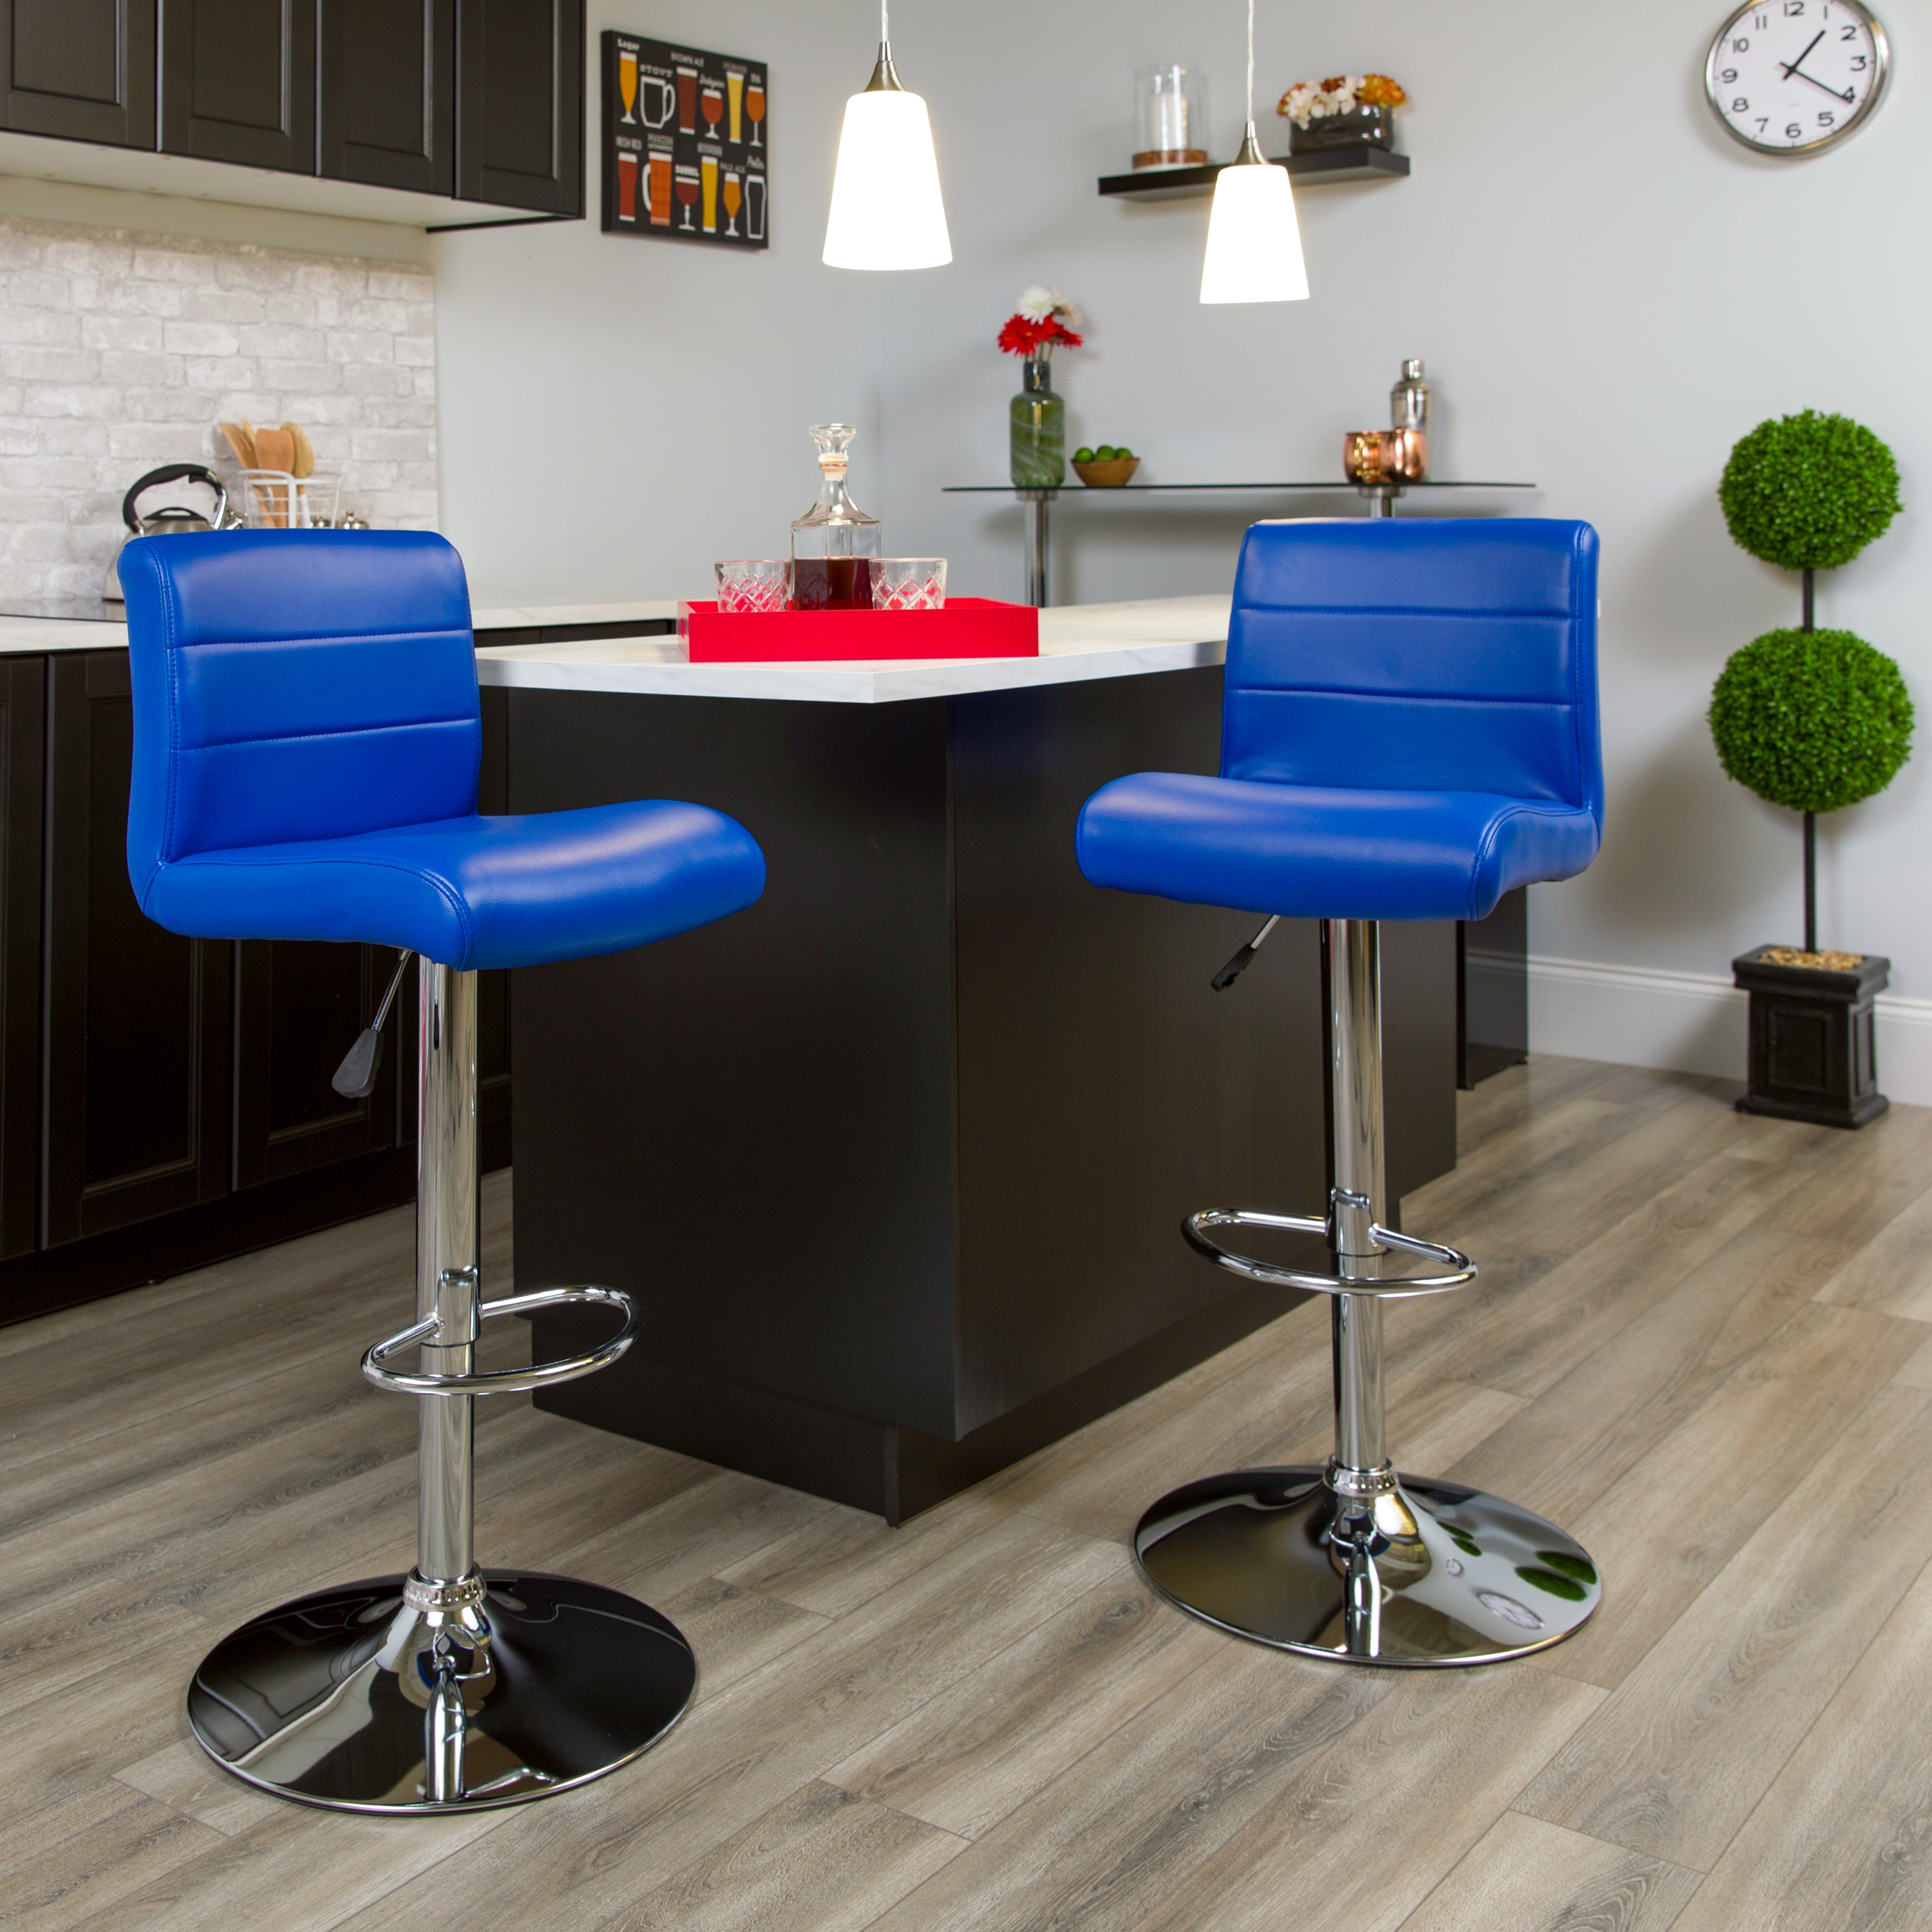 Contemporary Vinyl Adjustable Height Barstool with Rolled Seat and Chrome Base-Bar Stool-Flash Furniture-Wall2Wall Furnishings